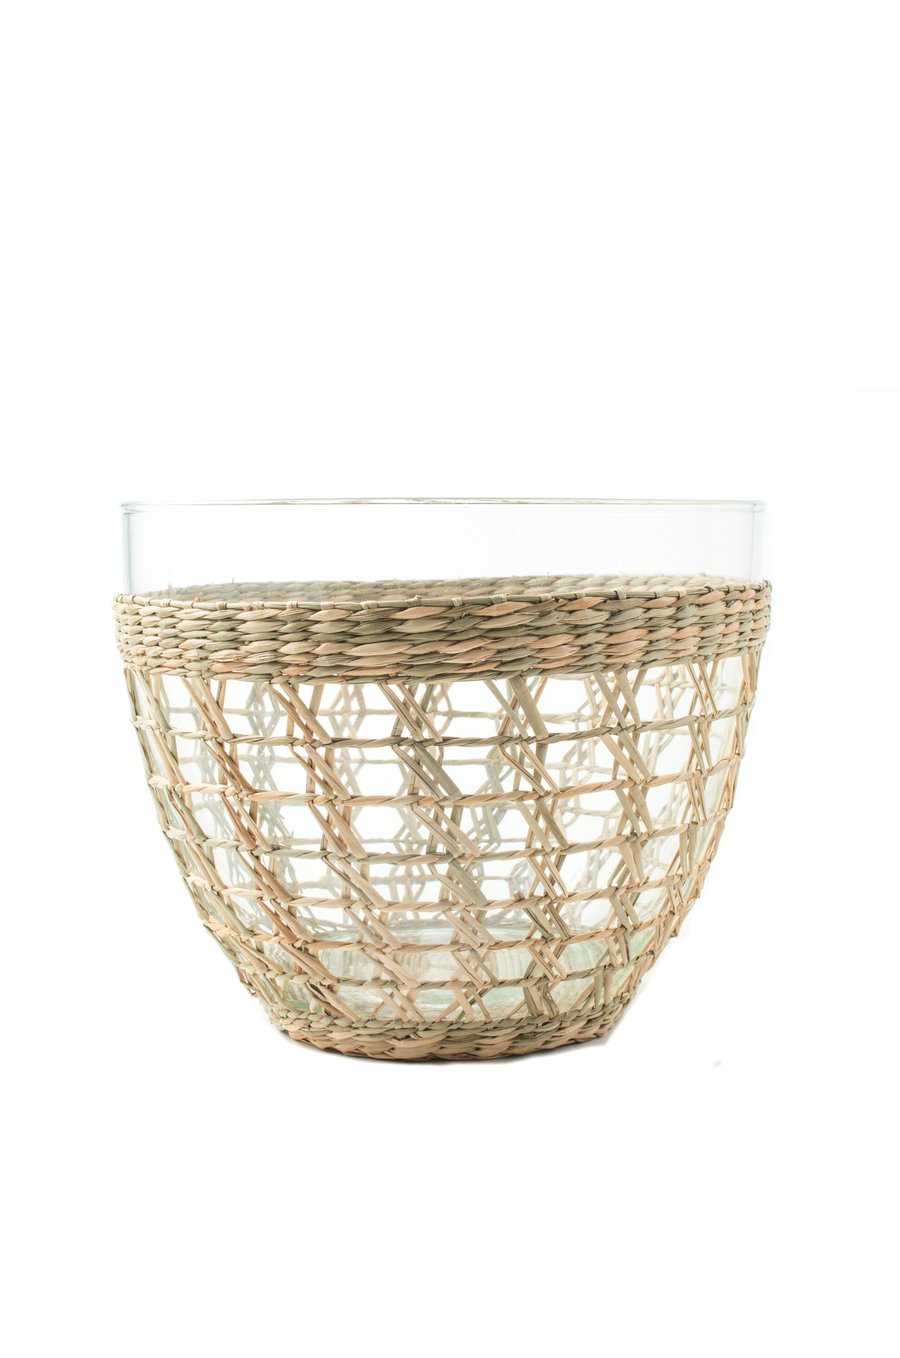 Looking for a fresh, classic look for your next dinner party or backyard barbecue? Check out our Seagrass Cage Salad Bowl! This beautiful bowl is crafted from recycled glass and features a natural seagrass wrap. It's perfect for serving salads, fruit, or even just using as decoration. Whether you're entertaining indoors or out, this bowl is sure to impress your guests.